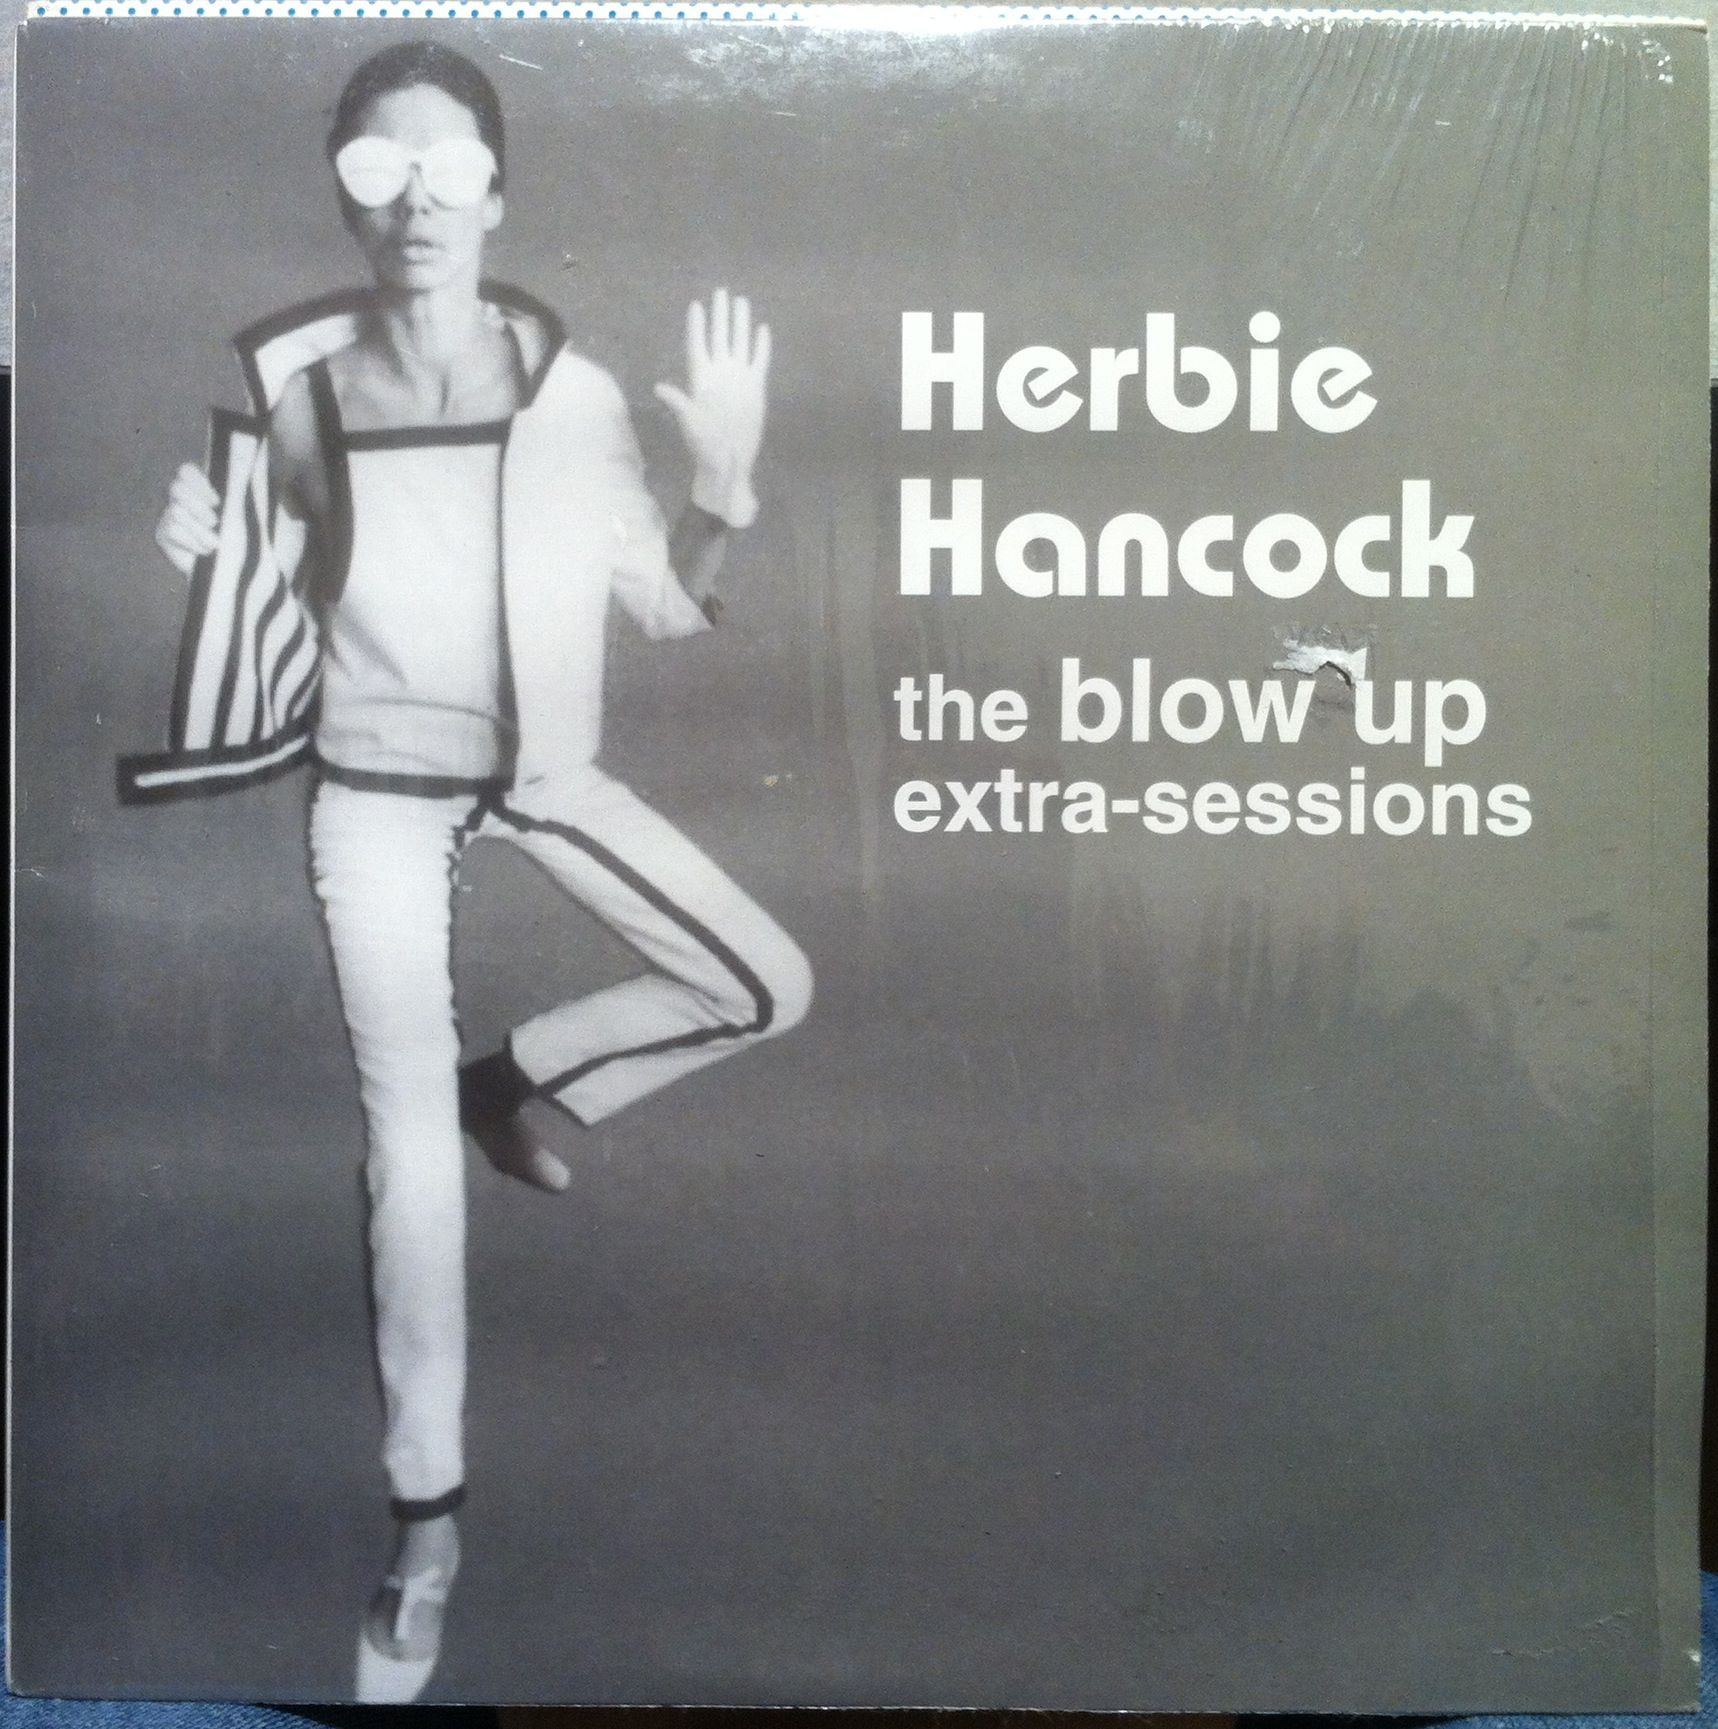 Herbie Hancock The Blow Up Extra Sessions LP VG VCS 005 LP Vinyl Italy